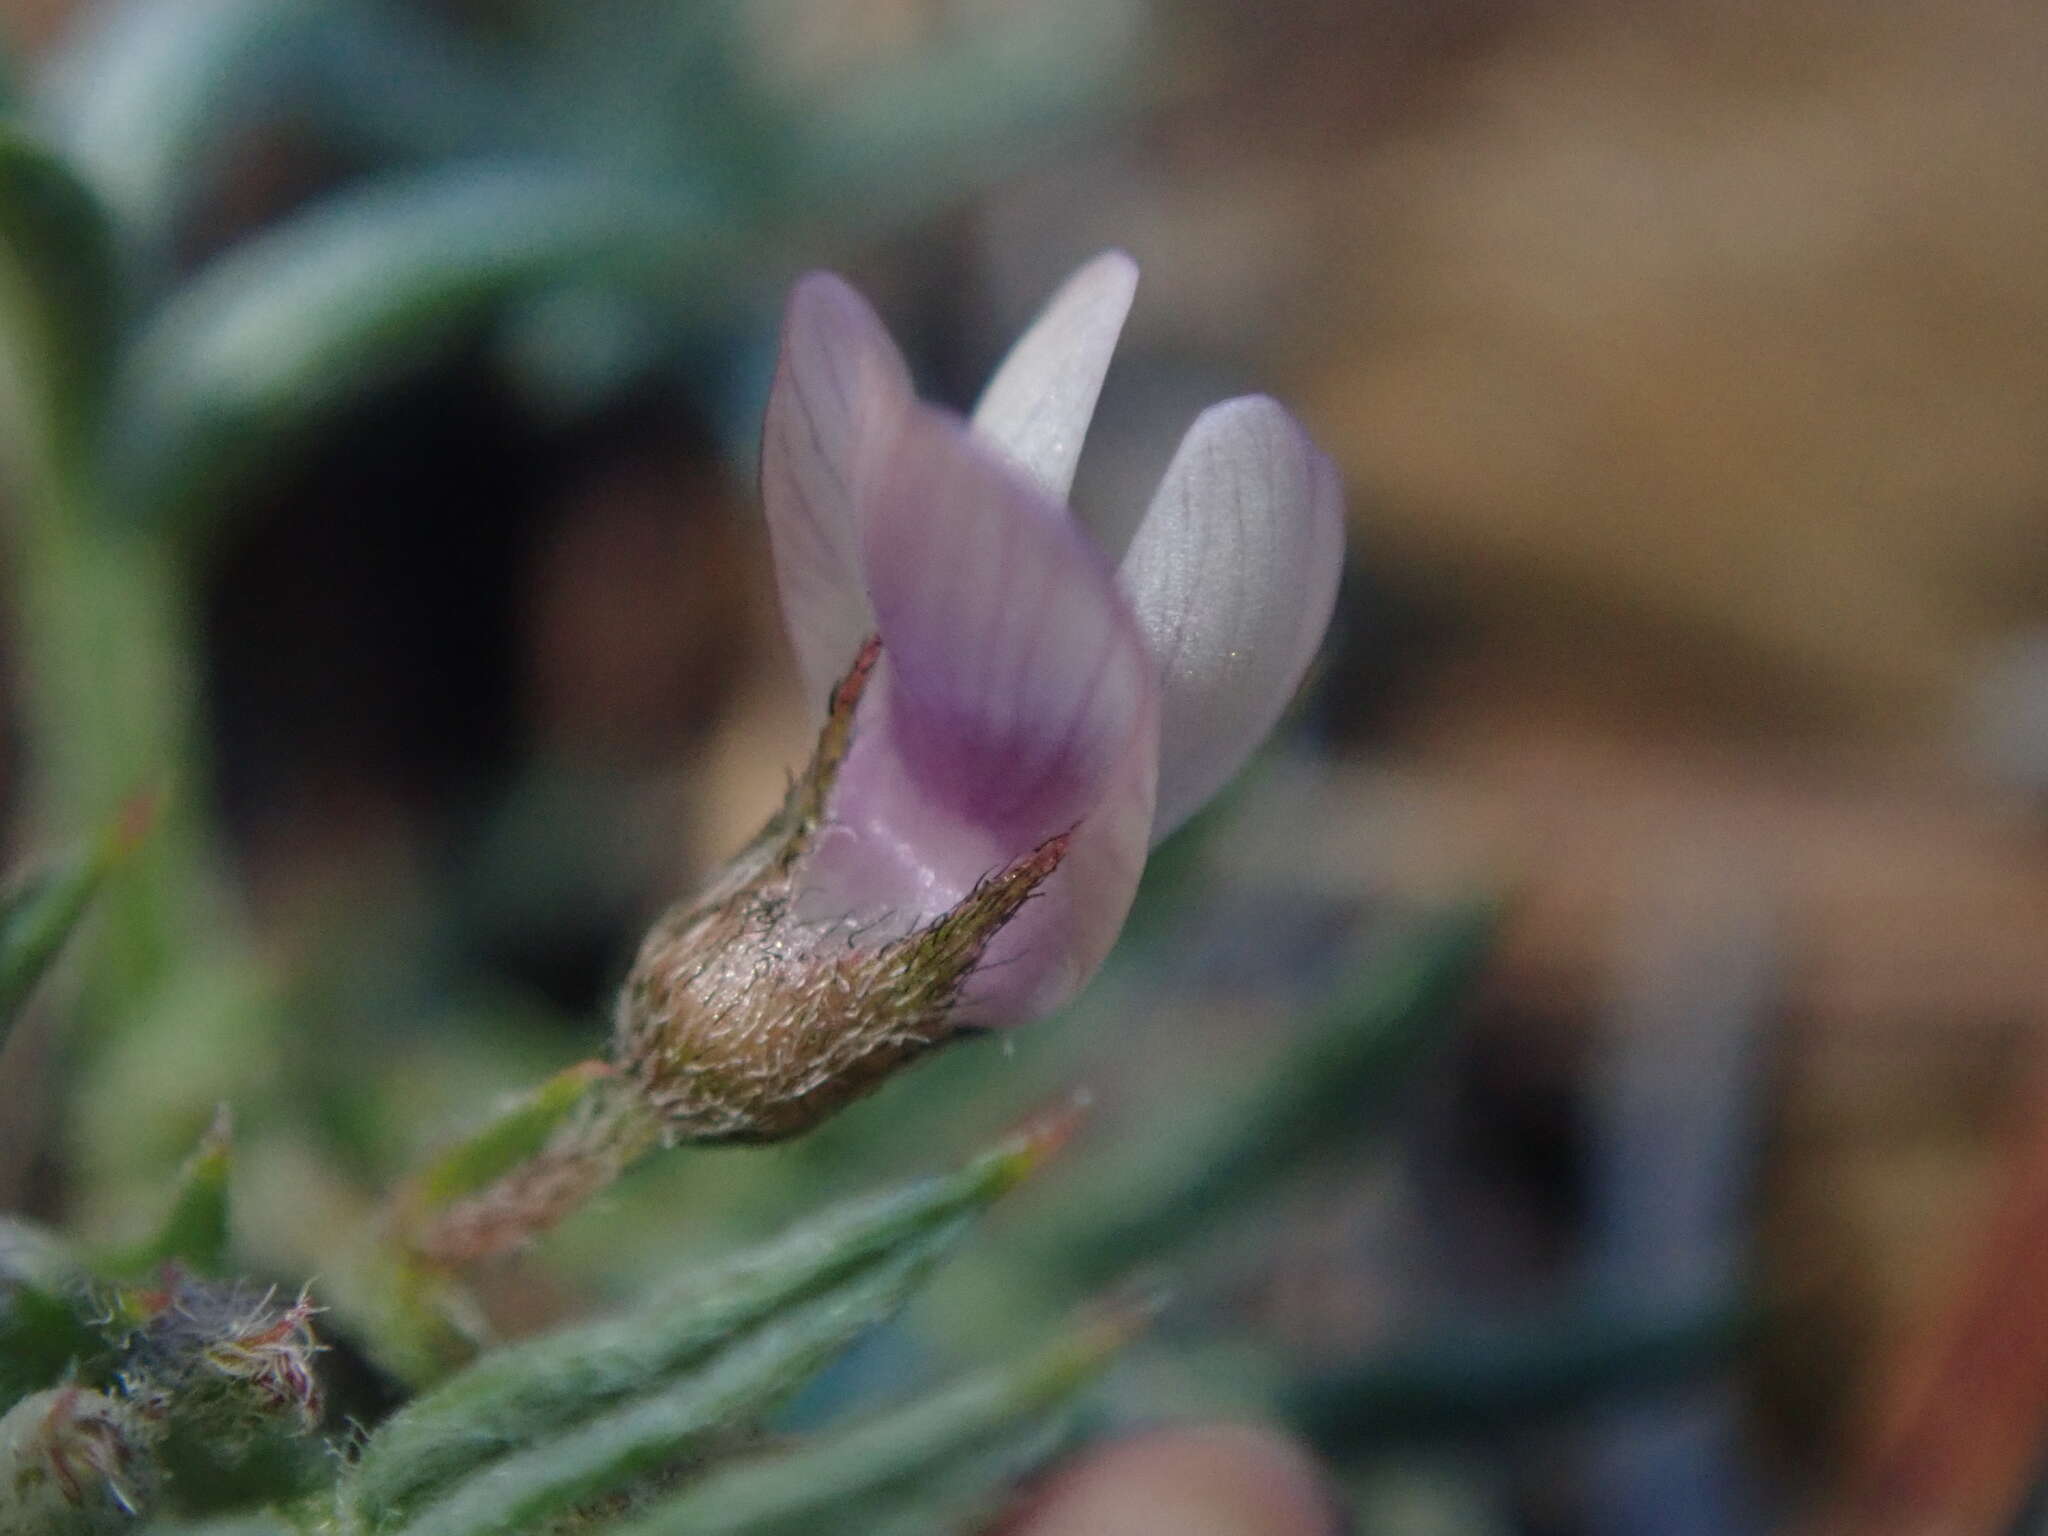 Image of spiny milkvetch